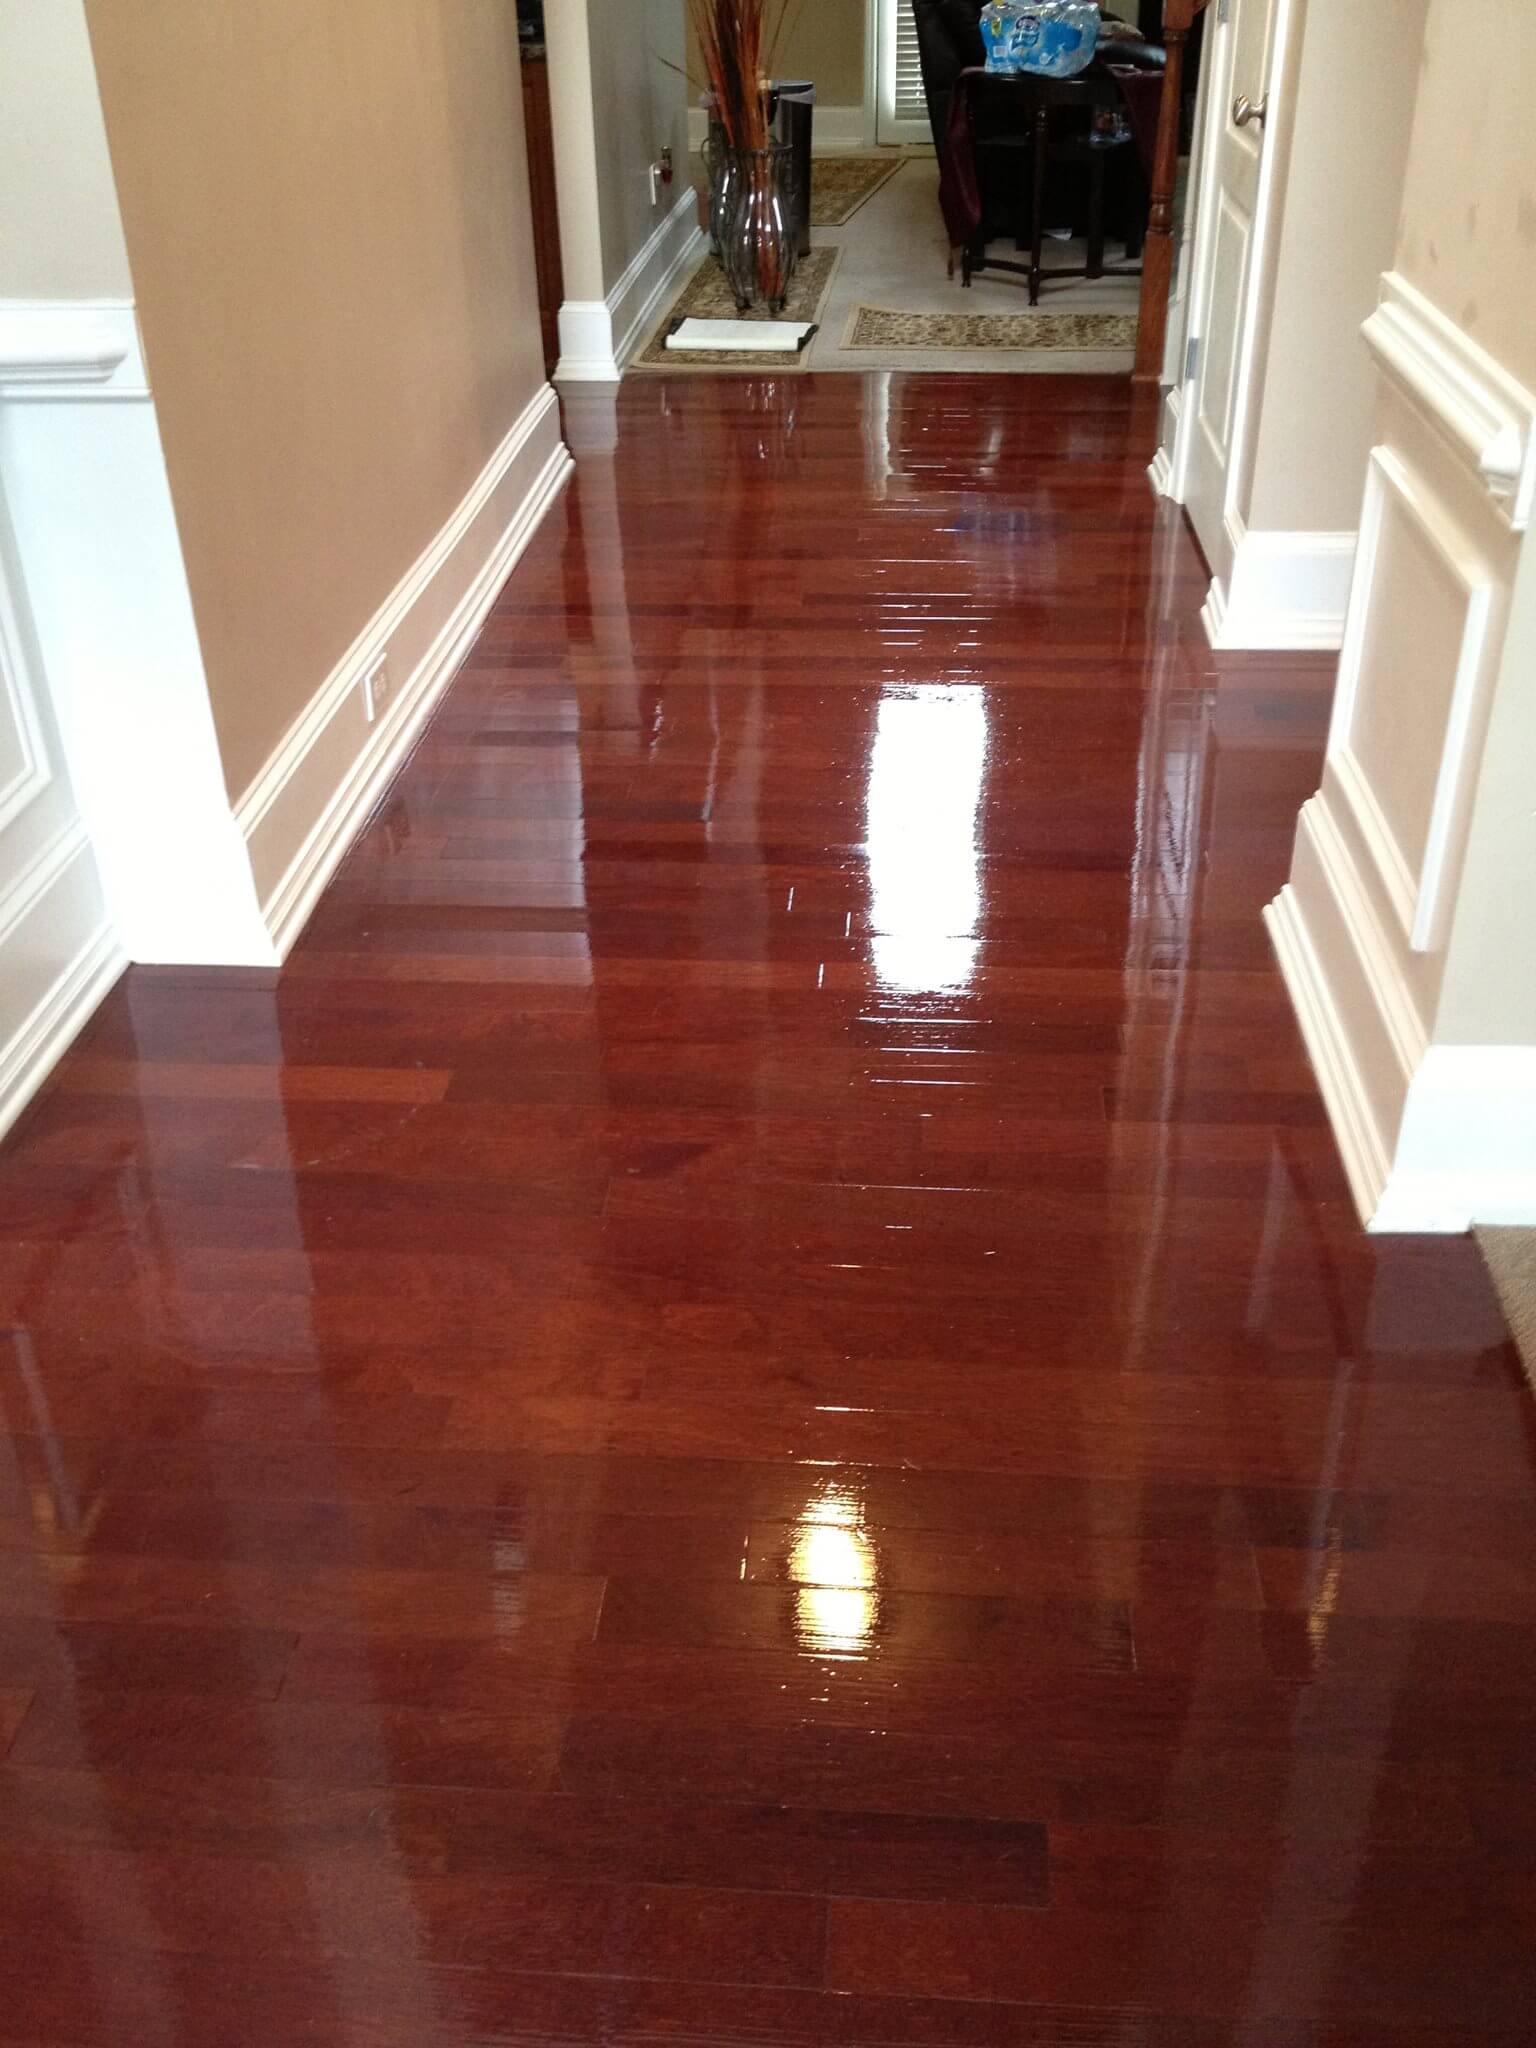 A refinished and shining hardwood floor in nashville